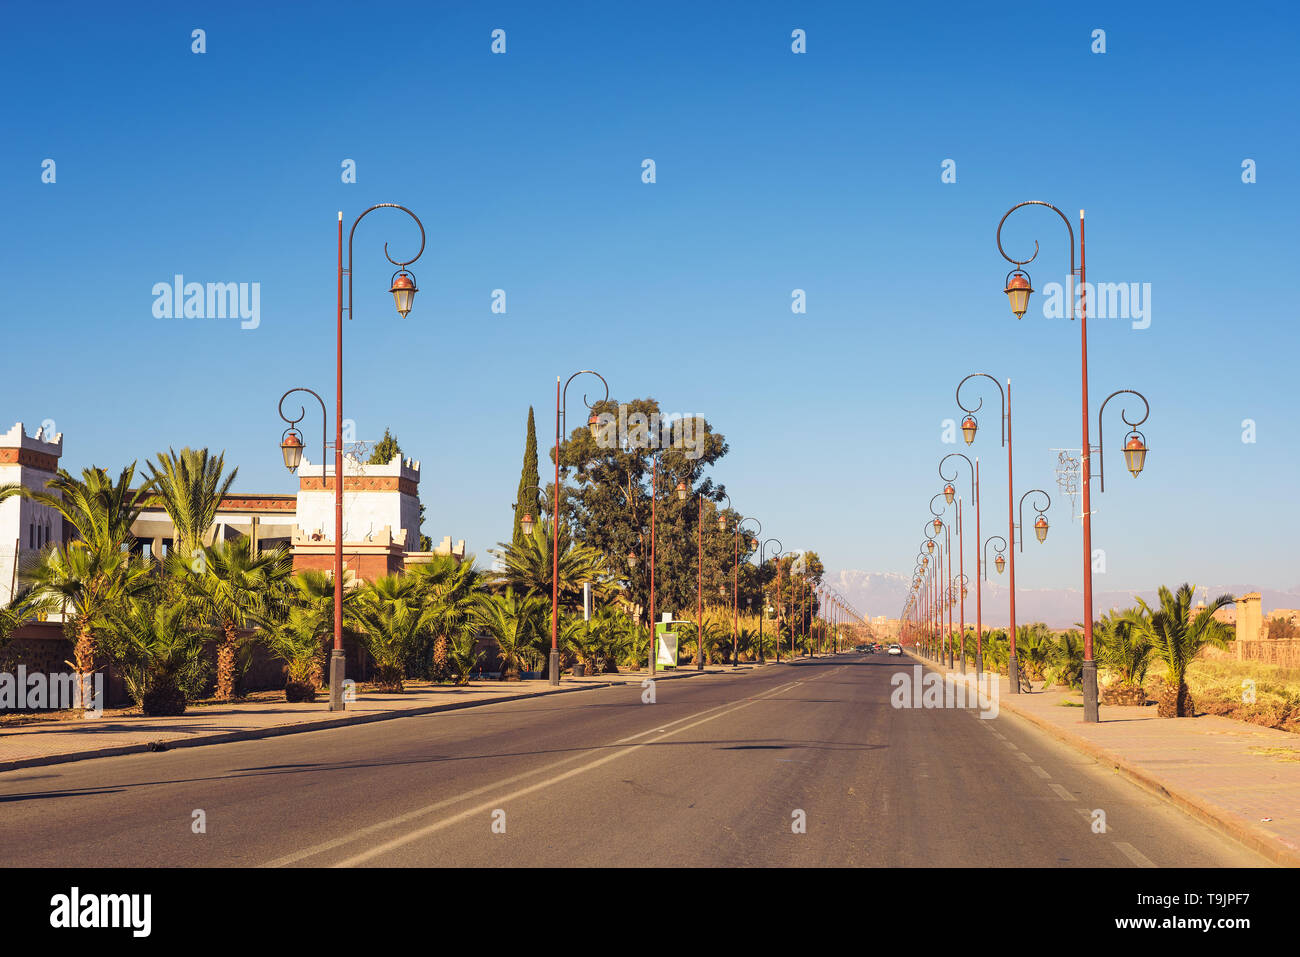 Road with row of stylish street lamps in the center of Ouarzazate, Morocco Stock Photo